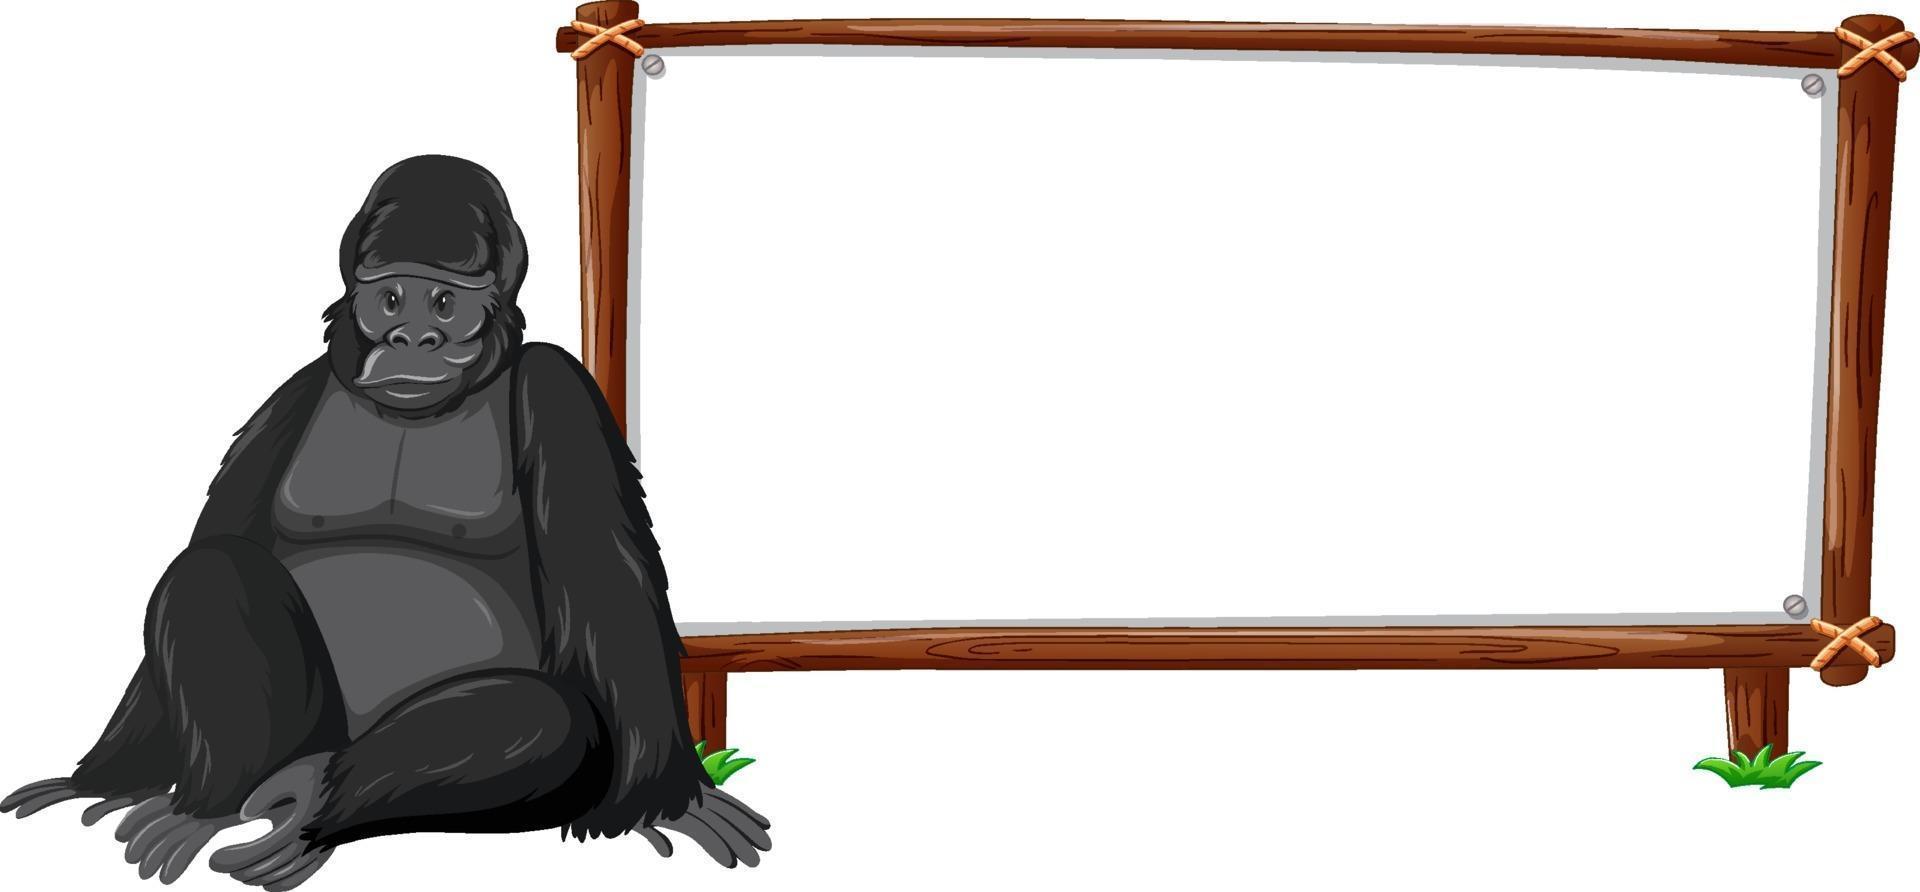 Gorilla with wooden frame horizontal isolated on white background vector